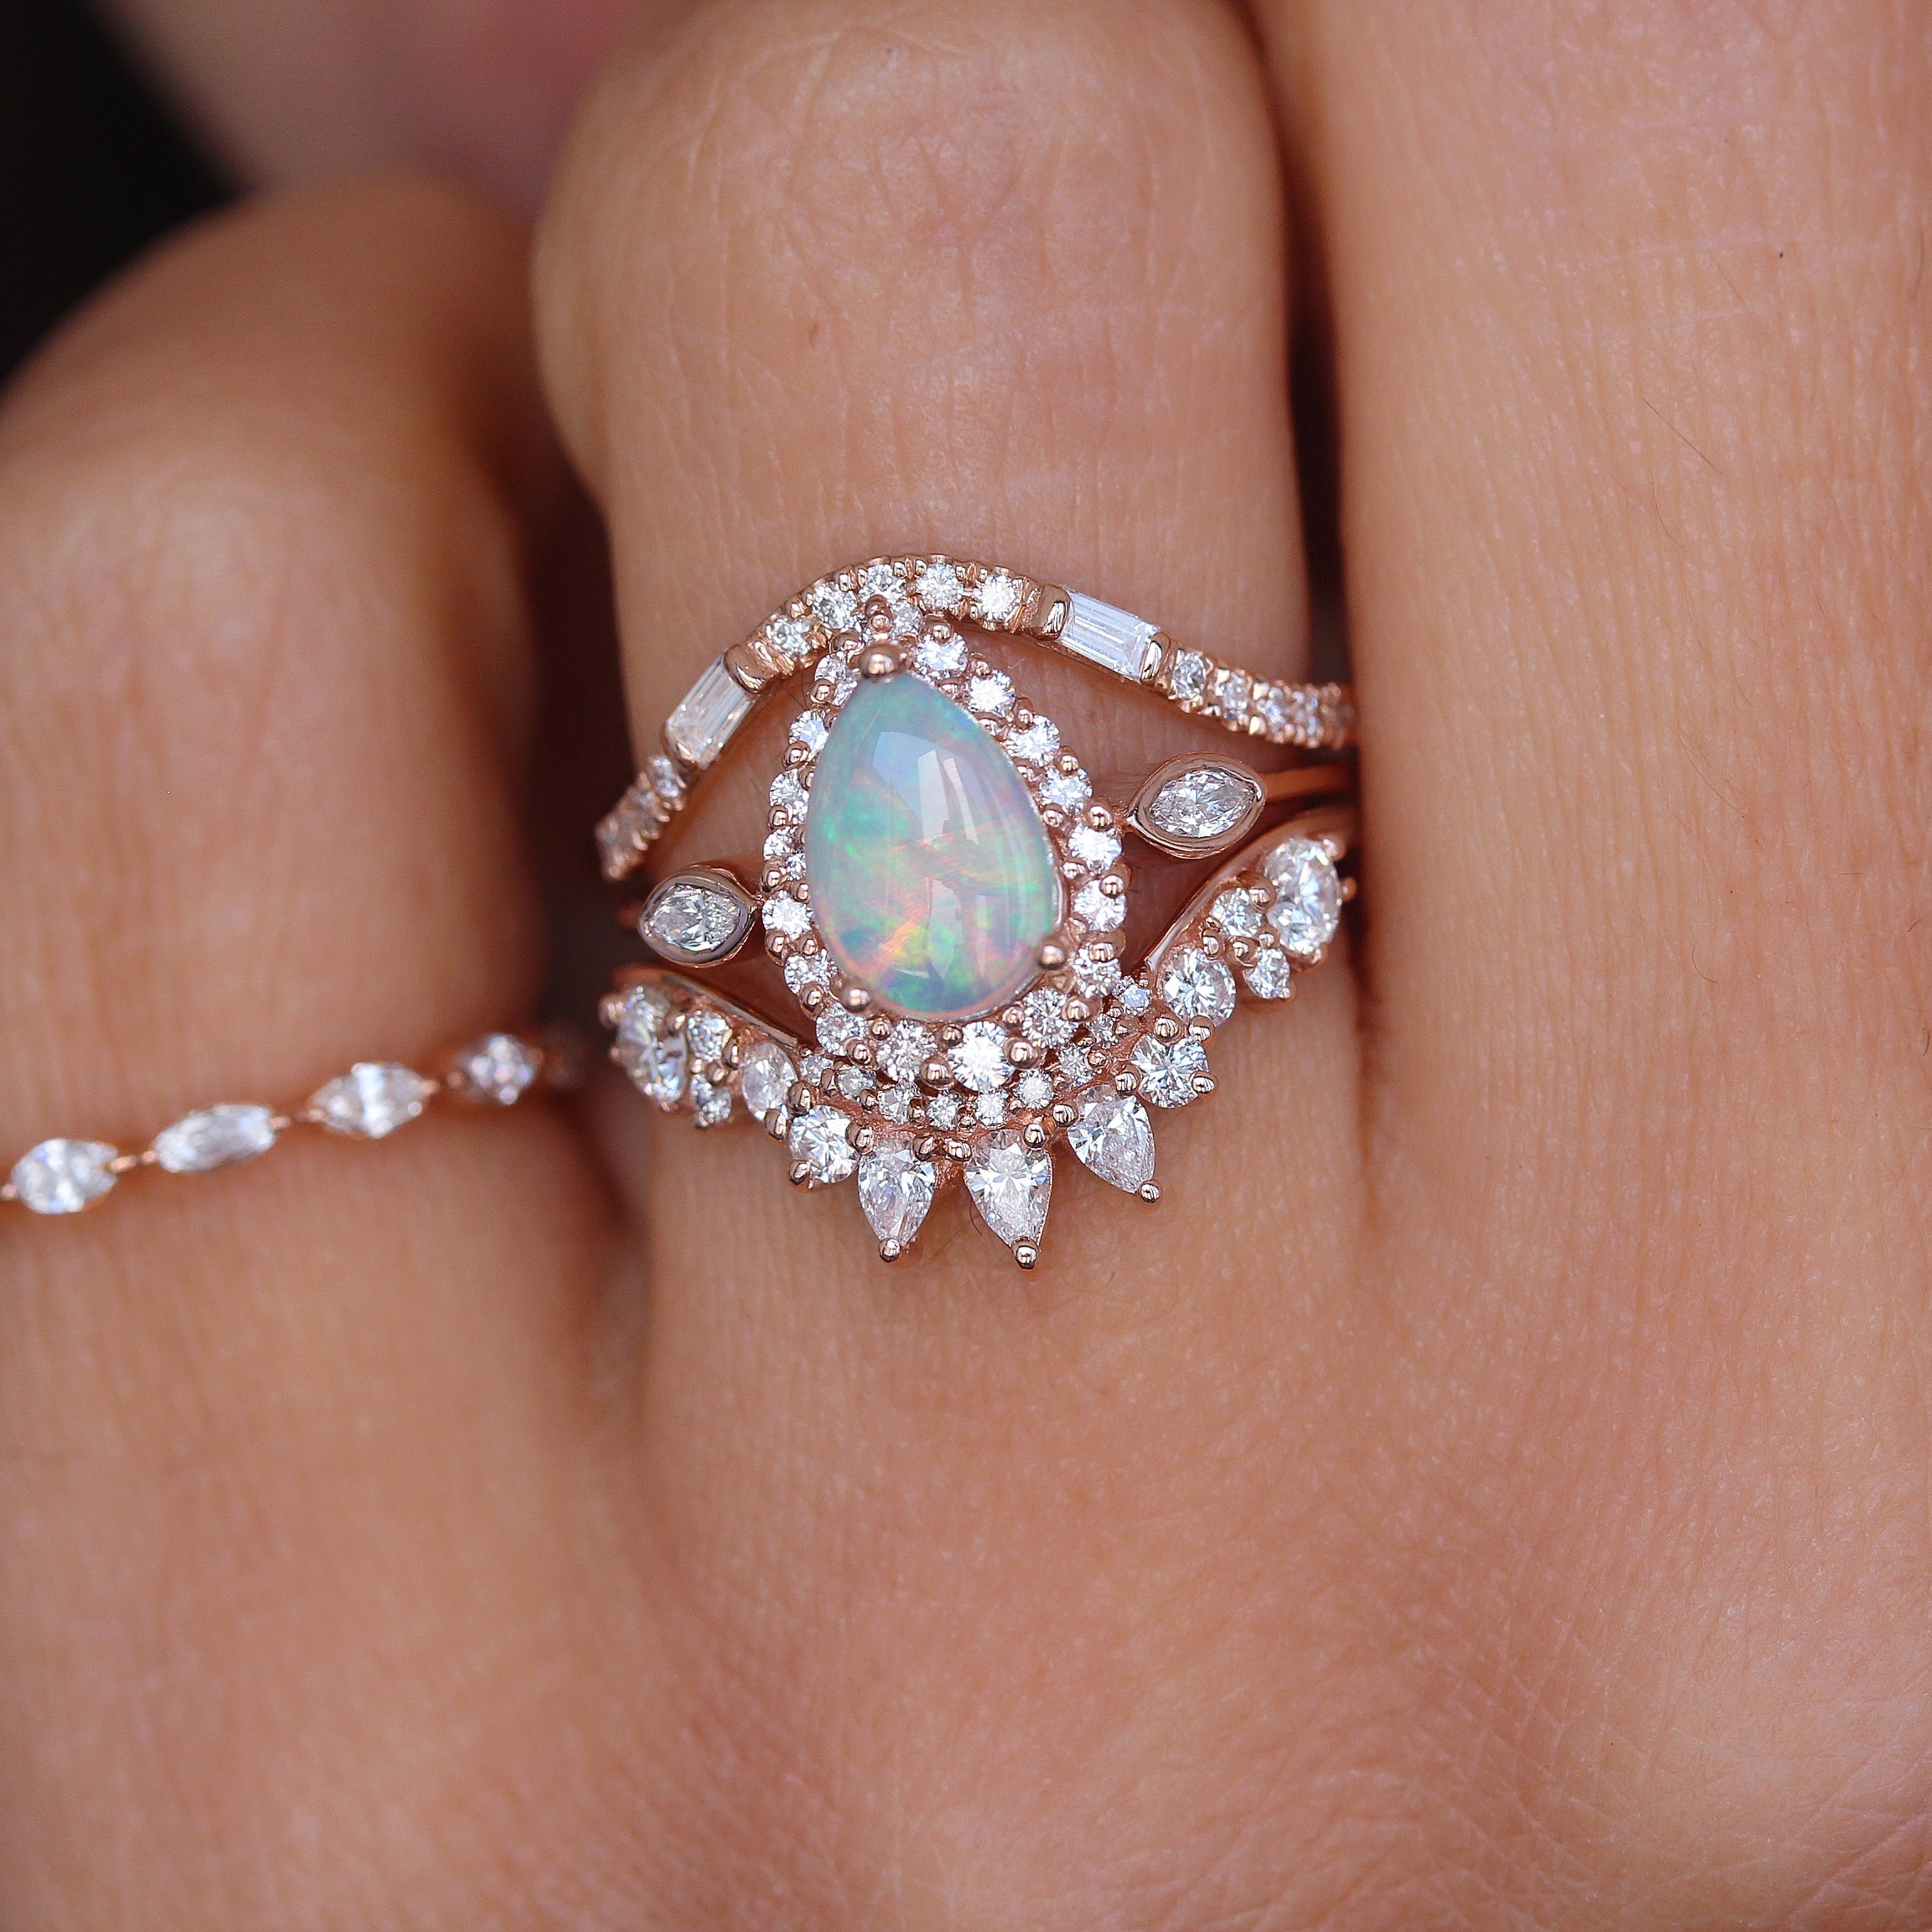 Pear Opal Marquise Diamond Halo Engagement Ring, 14K Rose Gold, 'Zoe', READY TO SHIP! ♥